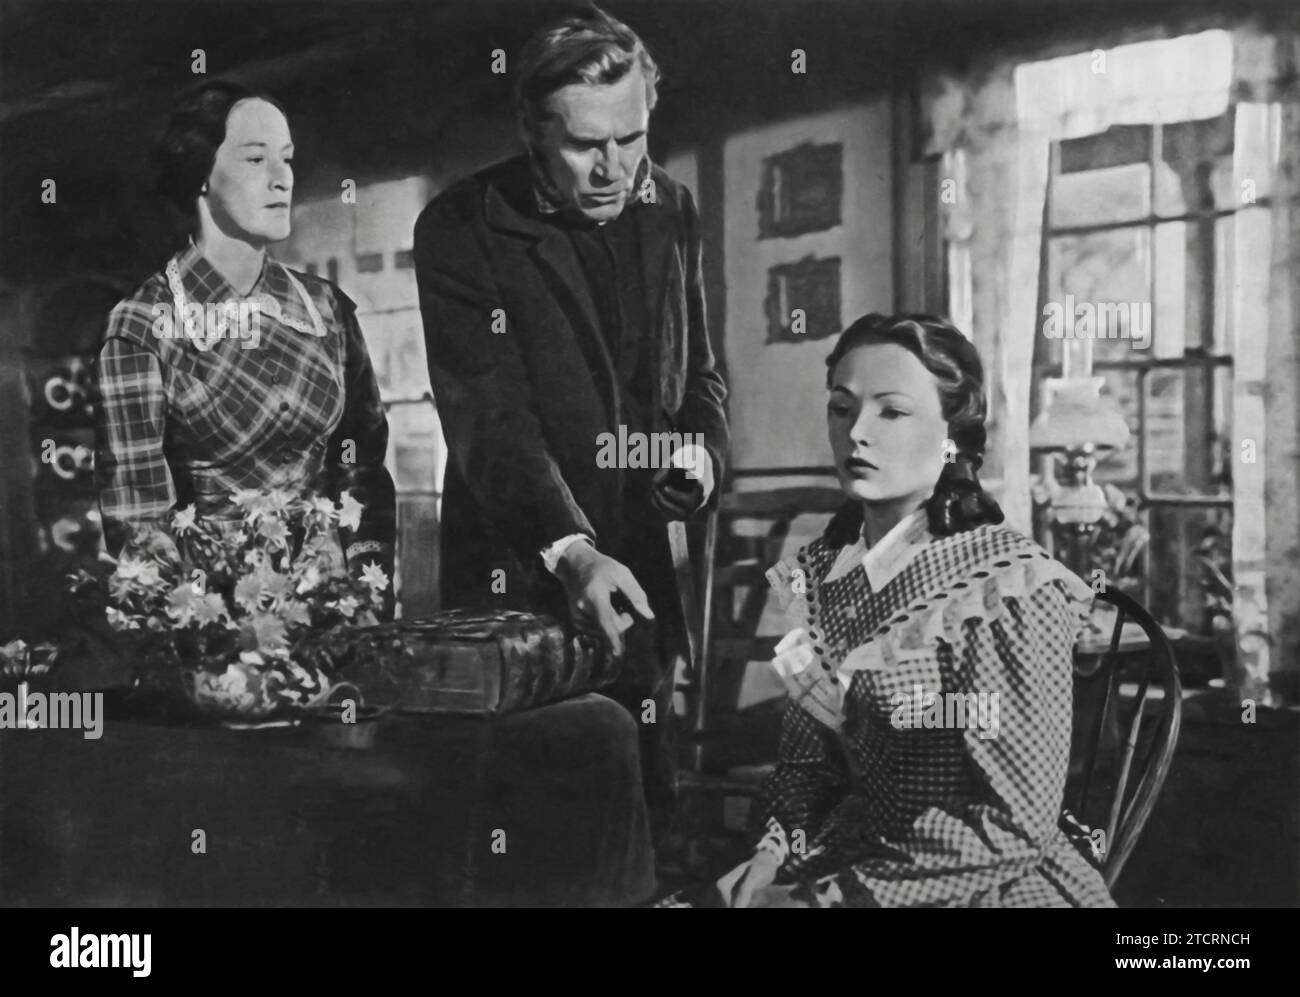 Anne Revere, Walter Huston, and Gene Tierney come together in the atmospheric drama 'Dragonwyck' (1946). In this gothic tale, Tierney plays Miranda, a young woman who moves to the Dragonwyck mansion to be a governess, only to find herself entangled in its dark mysteries. Huston portrays the enigmatic Nicholas Van Ryn, a wealthy patroon whose intentions are shrouded in ambiguity. Anne Revere adds depth to the story as Abigail, providing a grounded contrast to the mansion's eerie atmosphere. Stock Photo